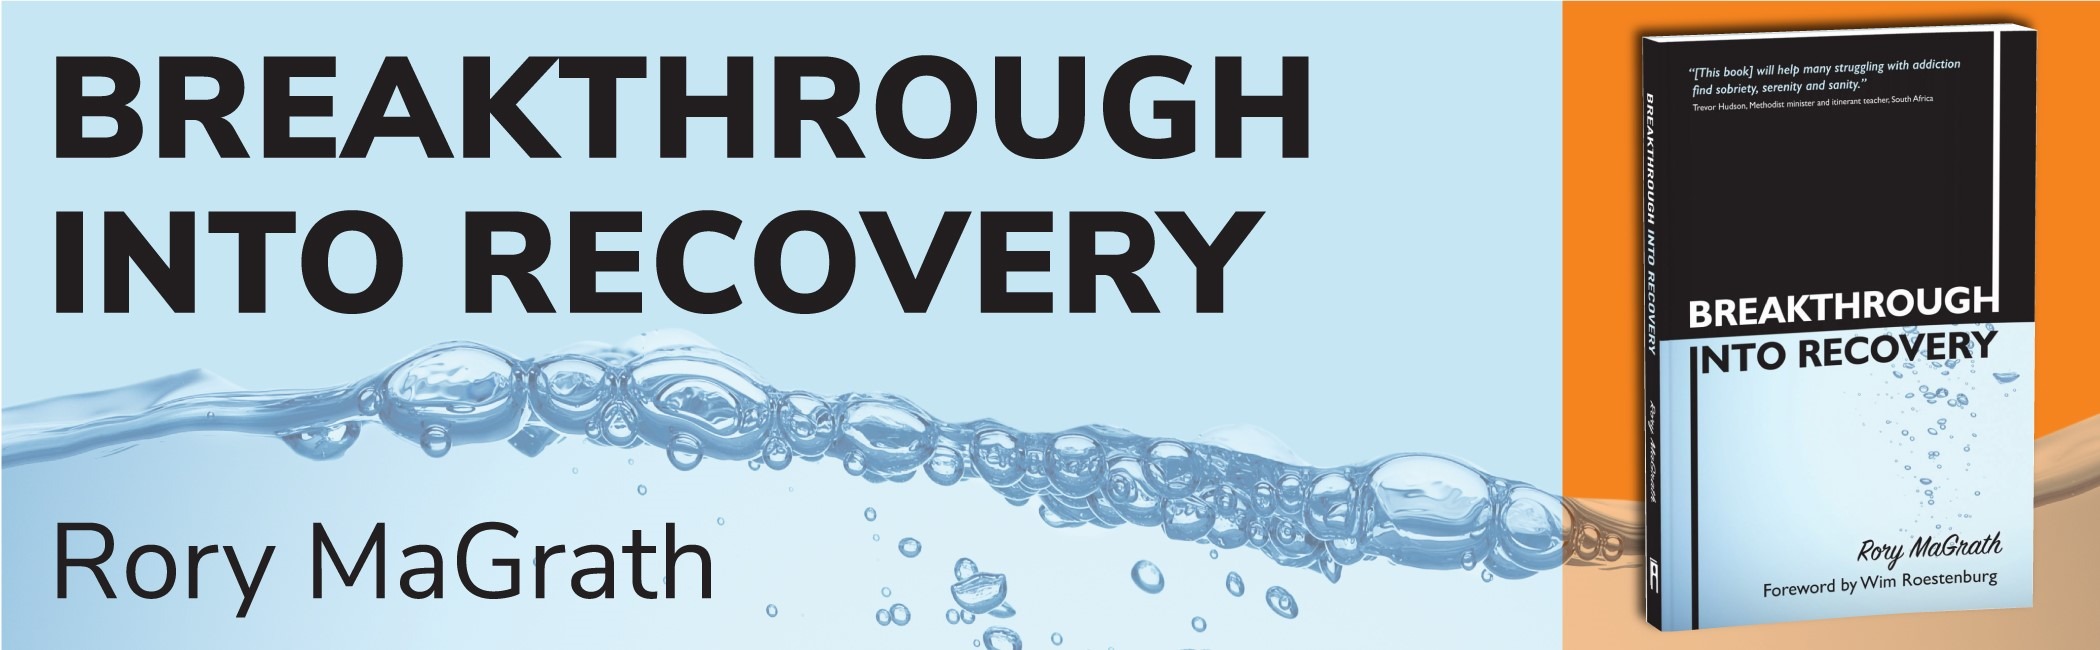 breakthrough into recovery book sales